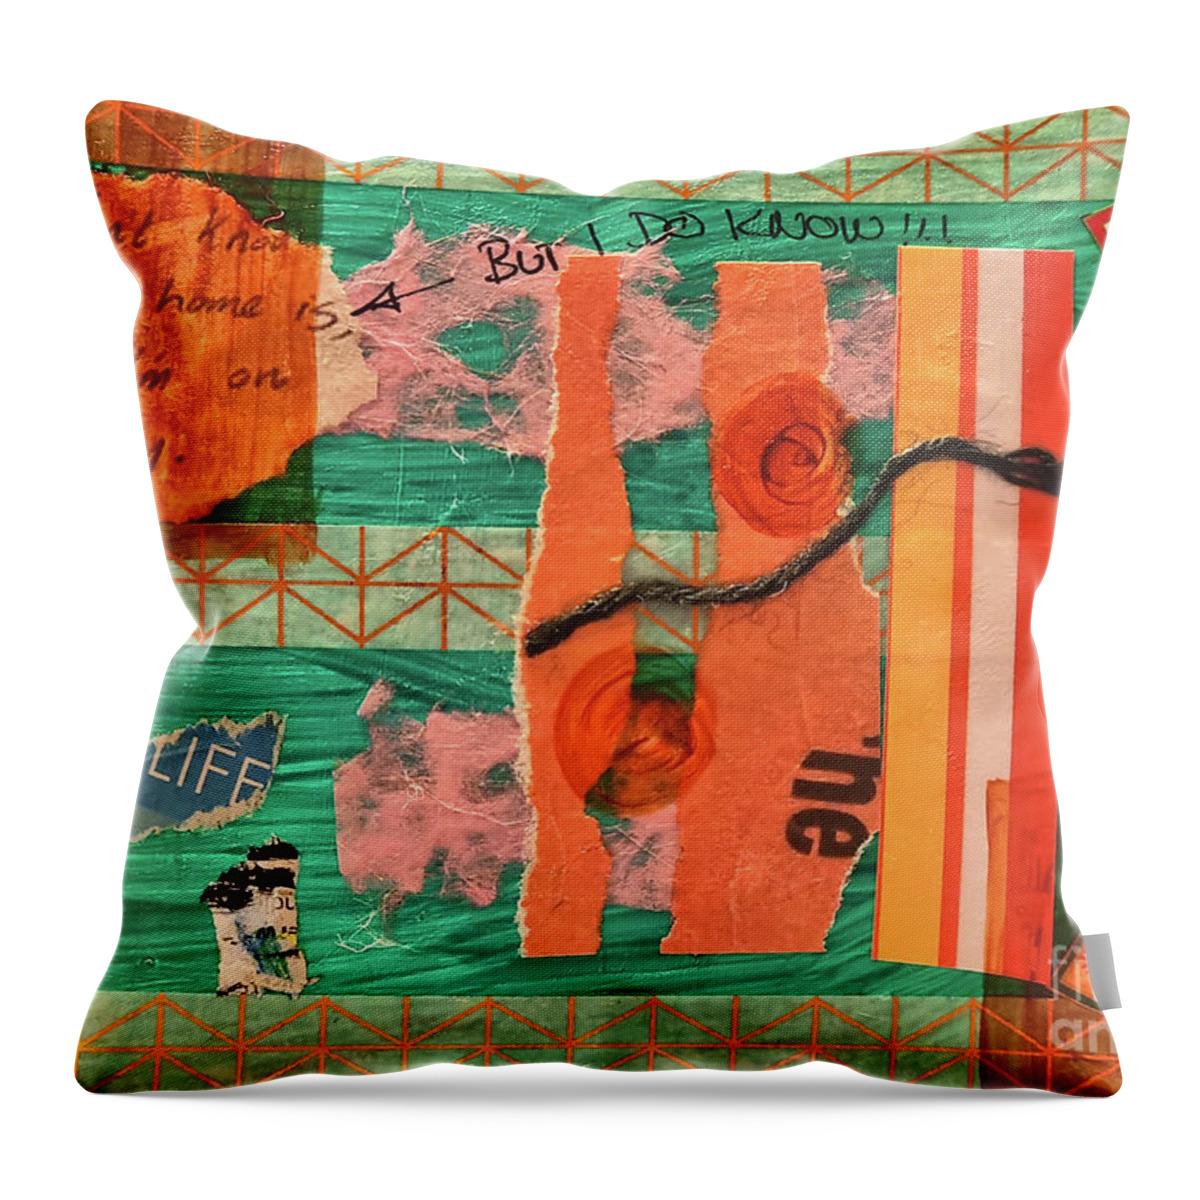 Invuitive Art Throw Pillow featuring the painting Going Home by Mimulux Patricia No